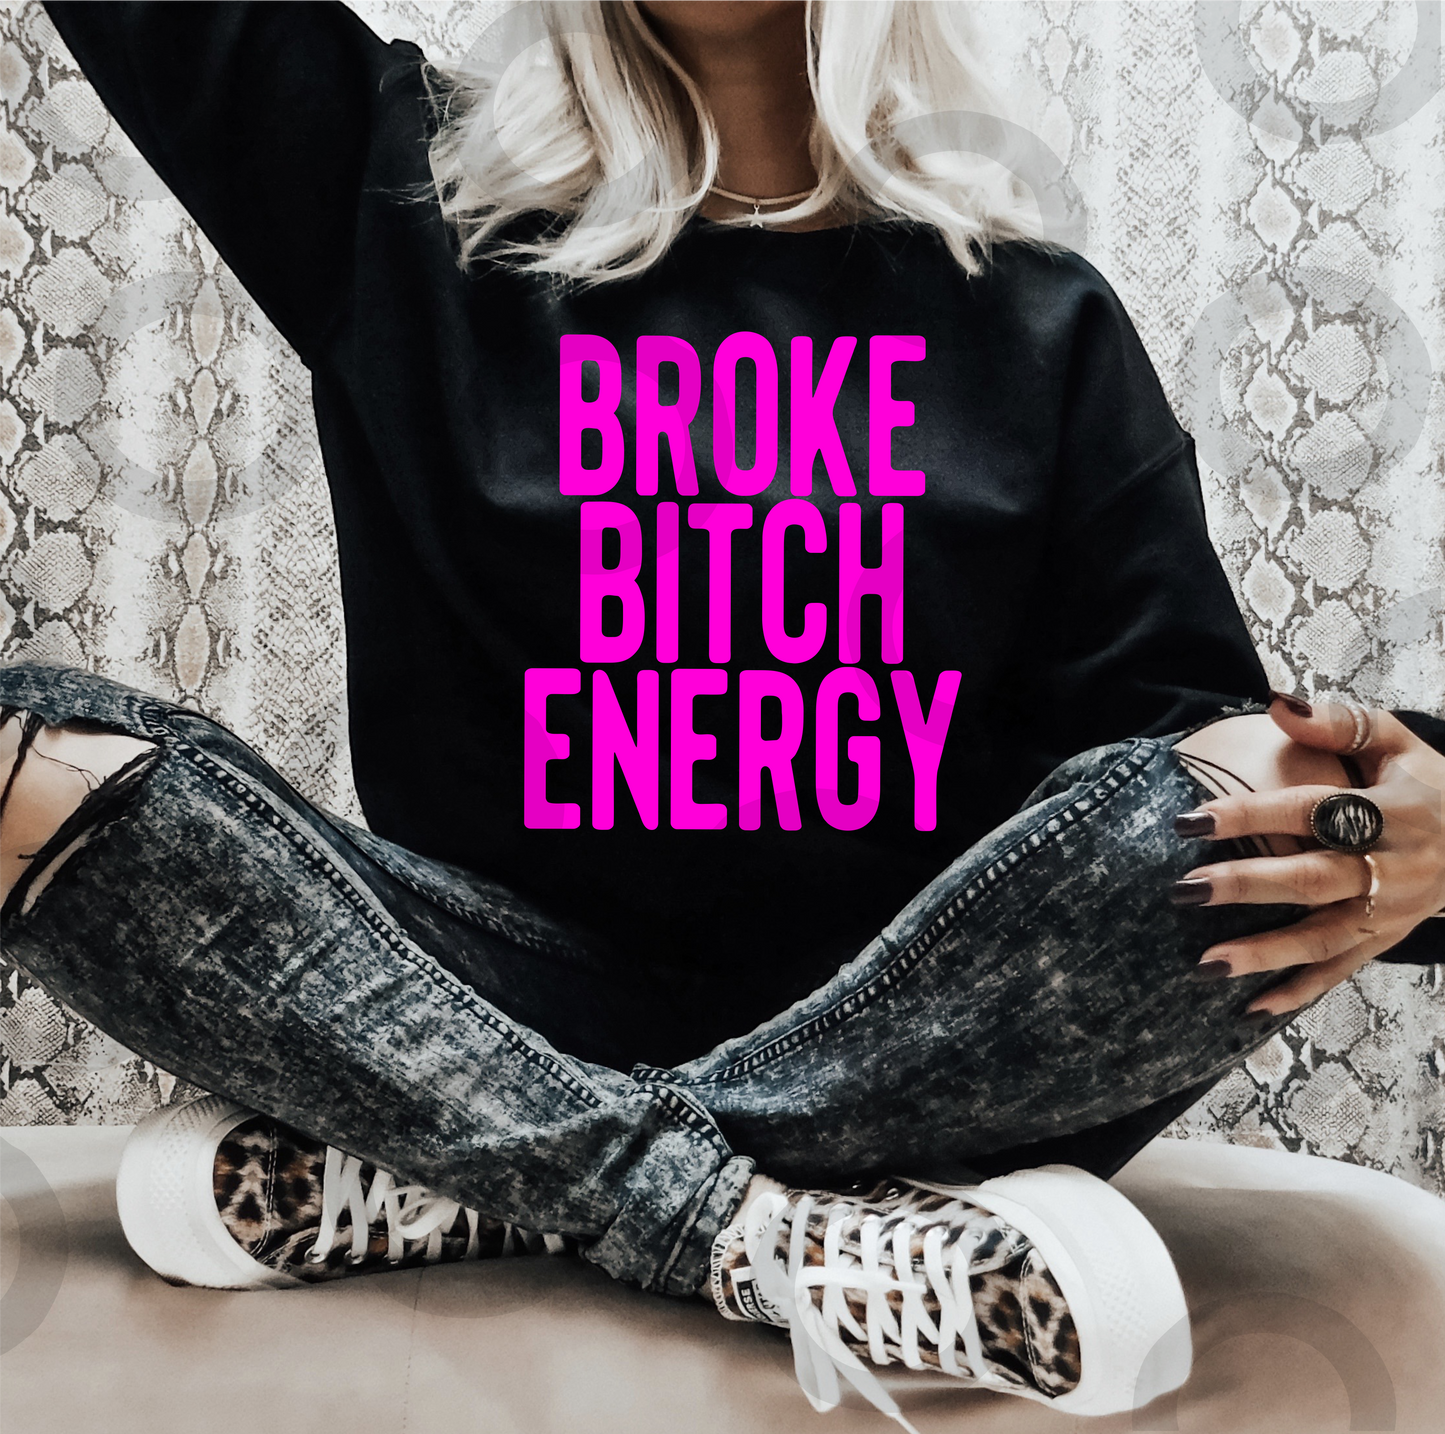 Broke Bitch Energy neon pink SINGLE COLOR  size ADULT .4 DTF TRANSFERPRINT TO ORDER